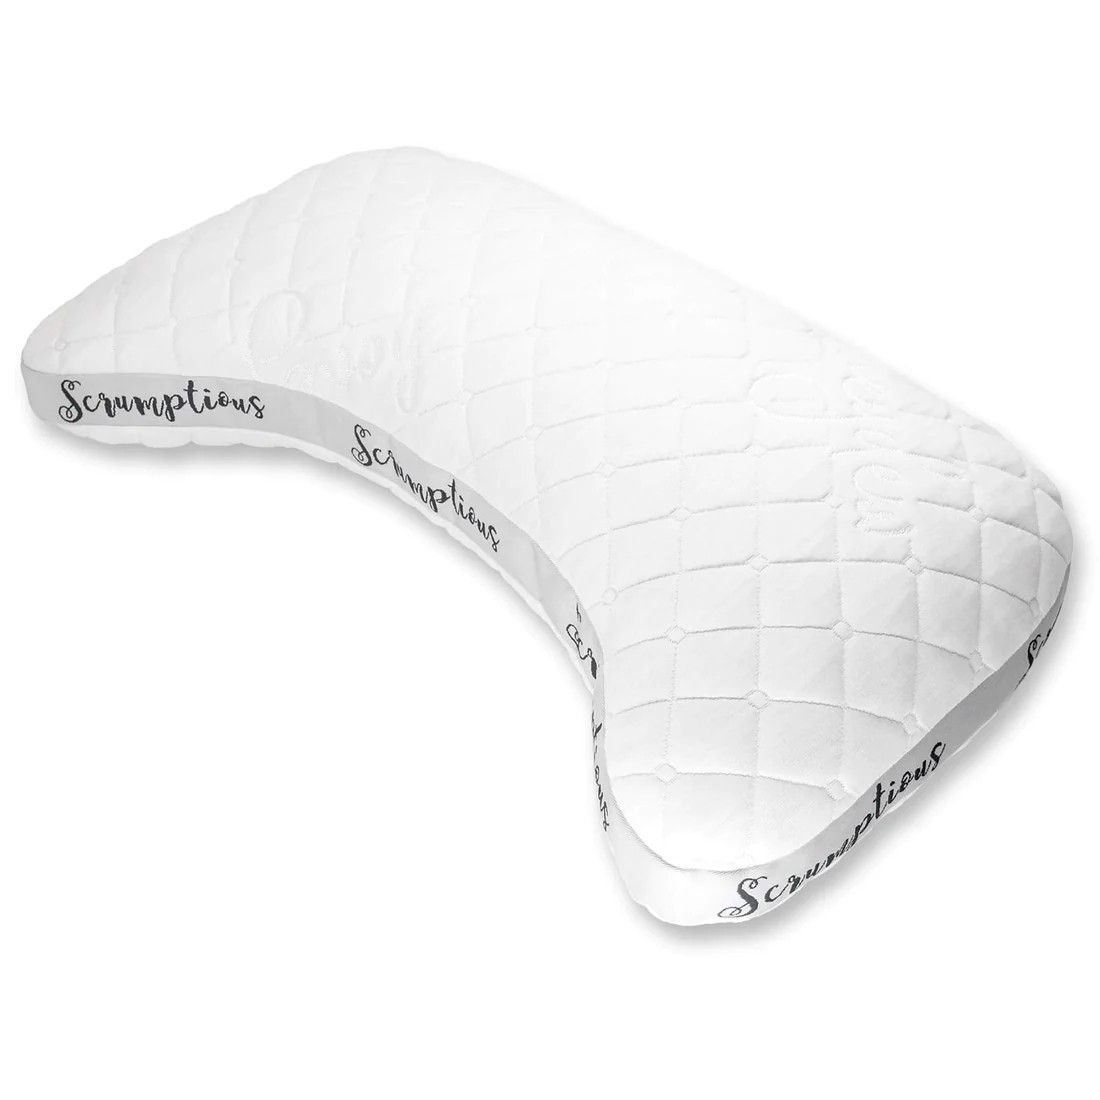 Best pillows for side sleepers, plus expert tips